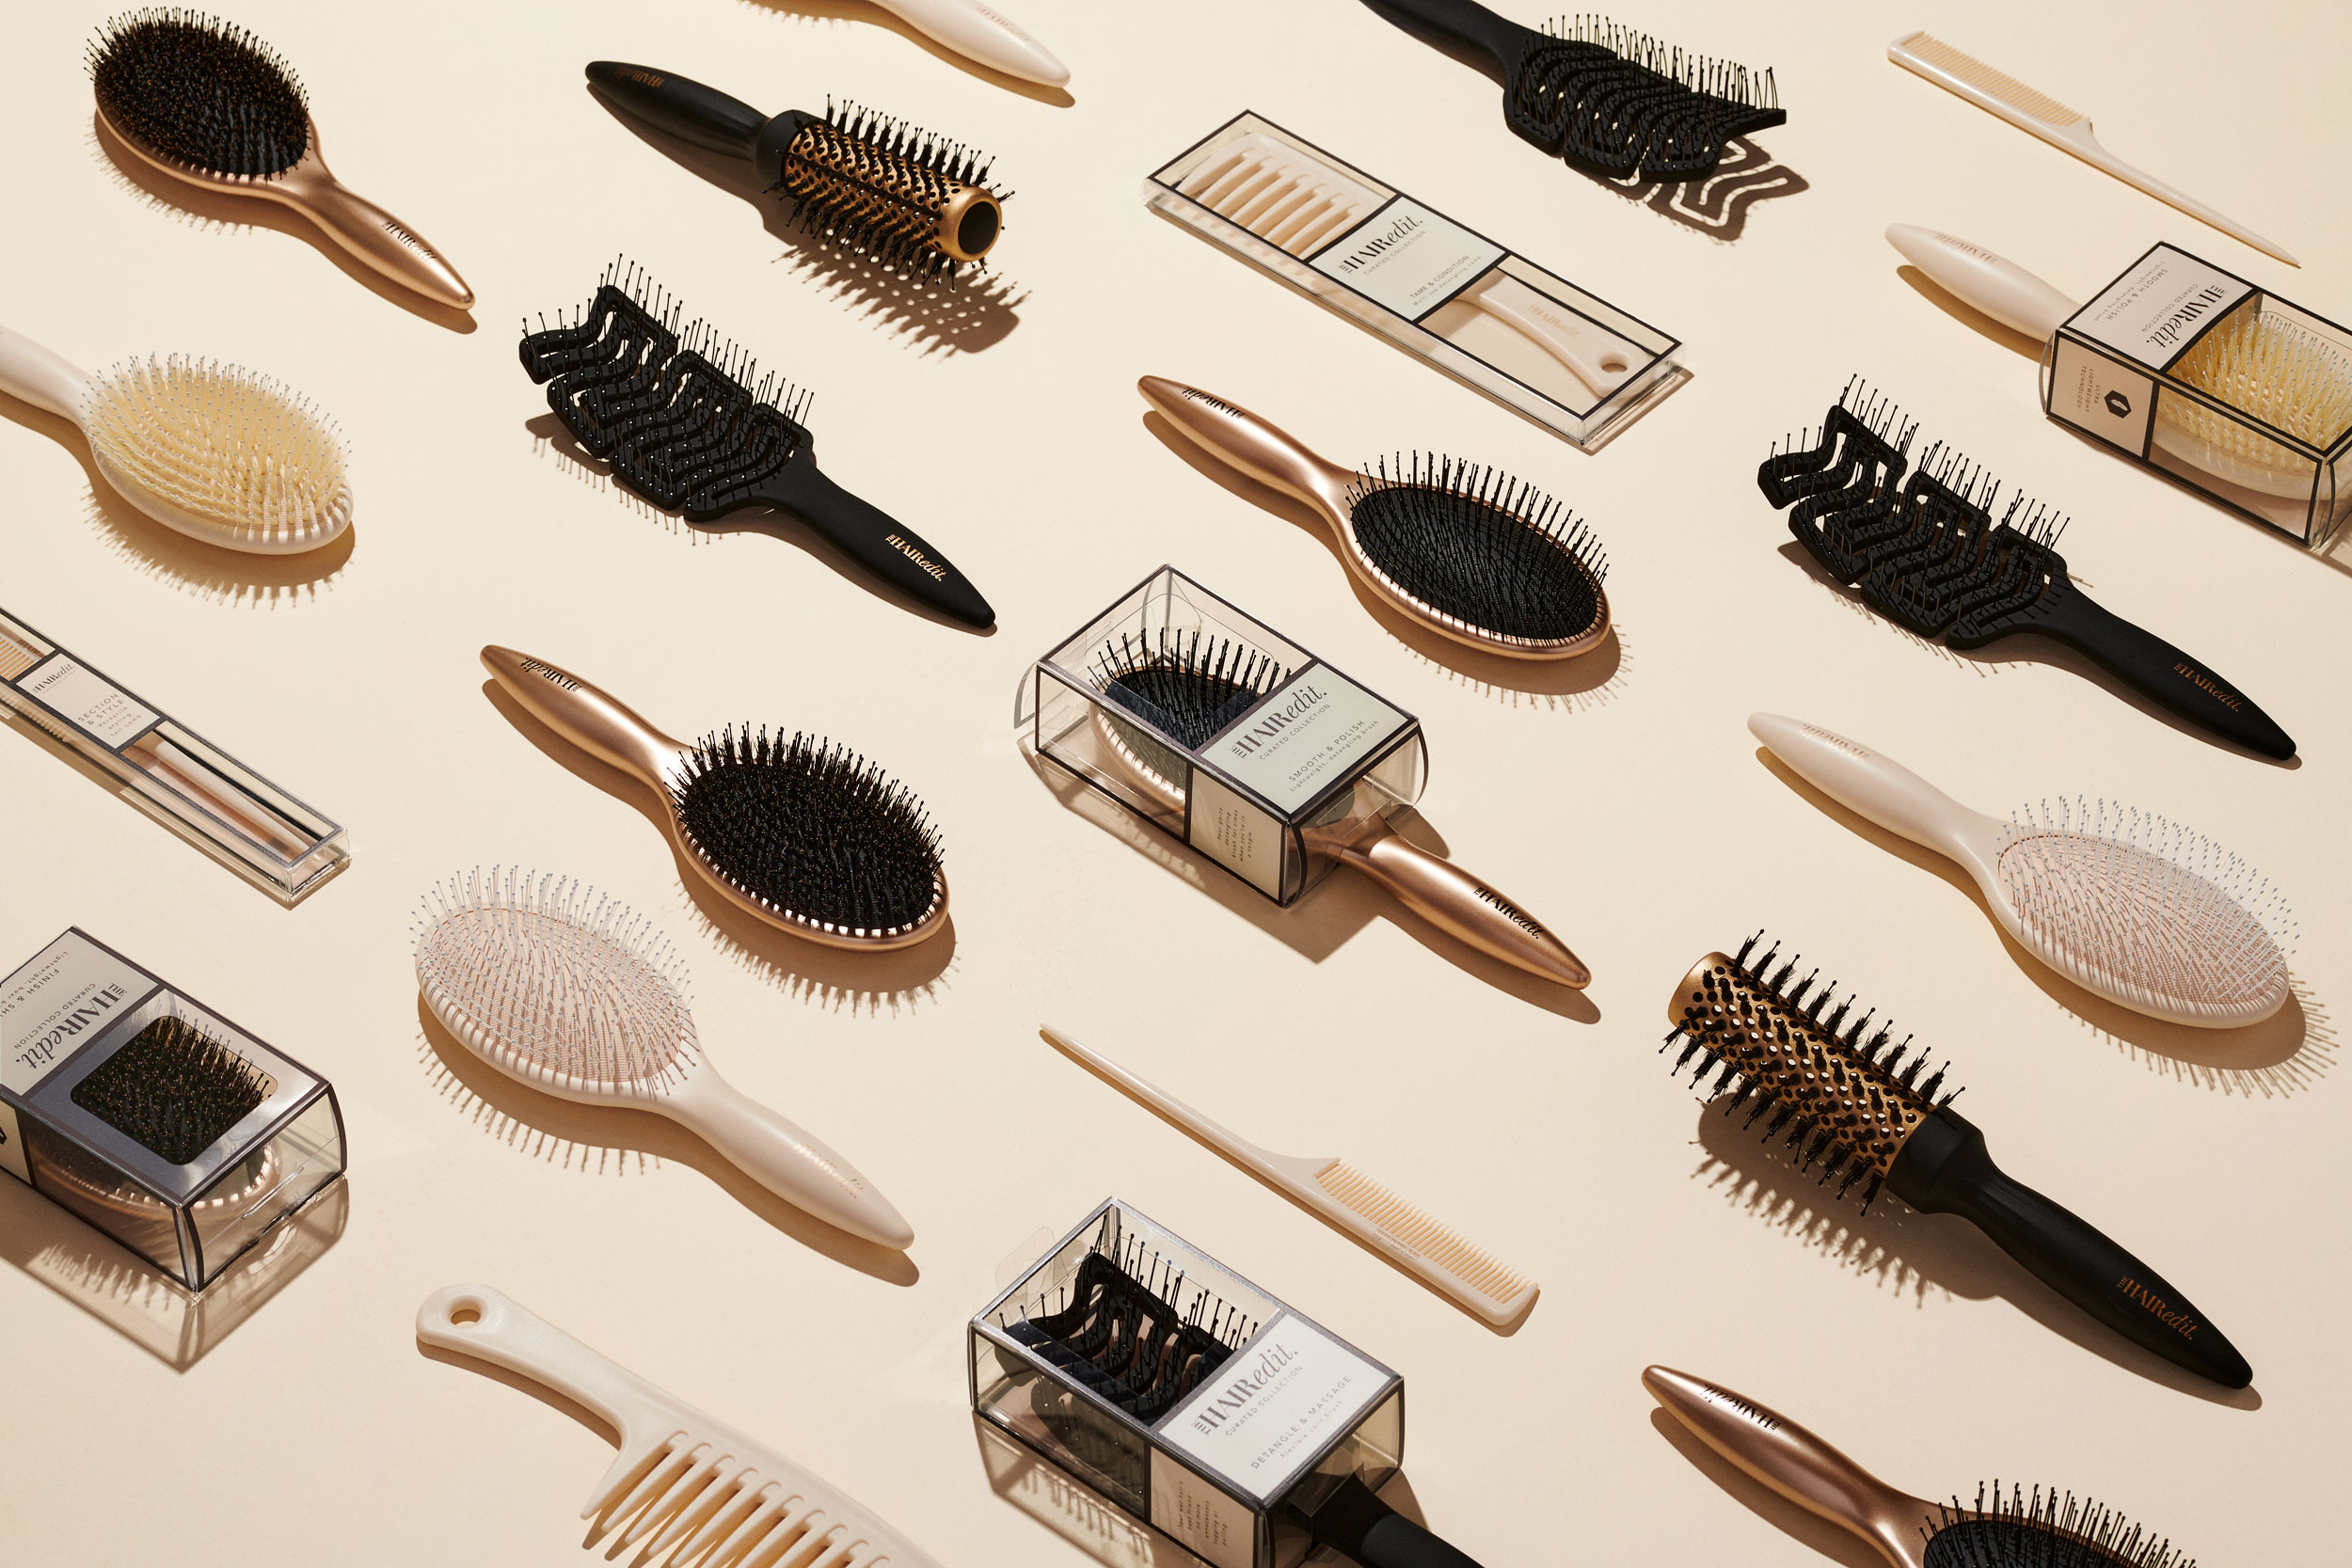 Hair brushes and combs organized neatly as flat-lay on cream-colored surface